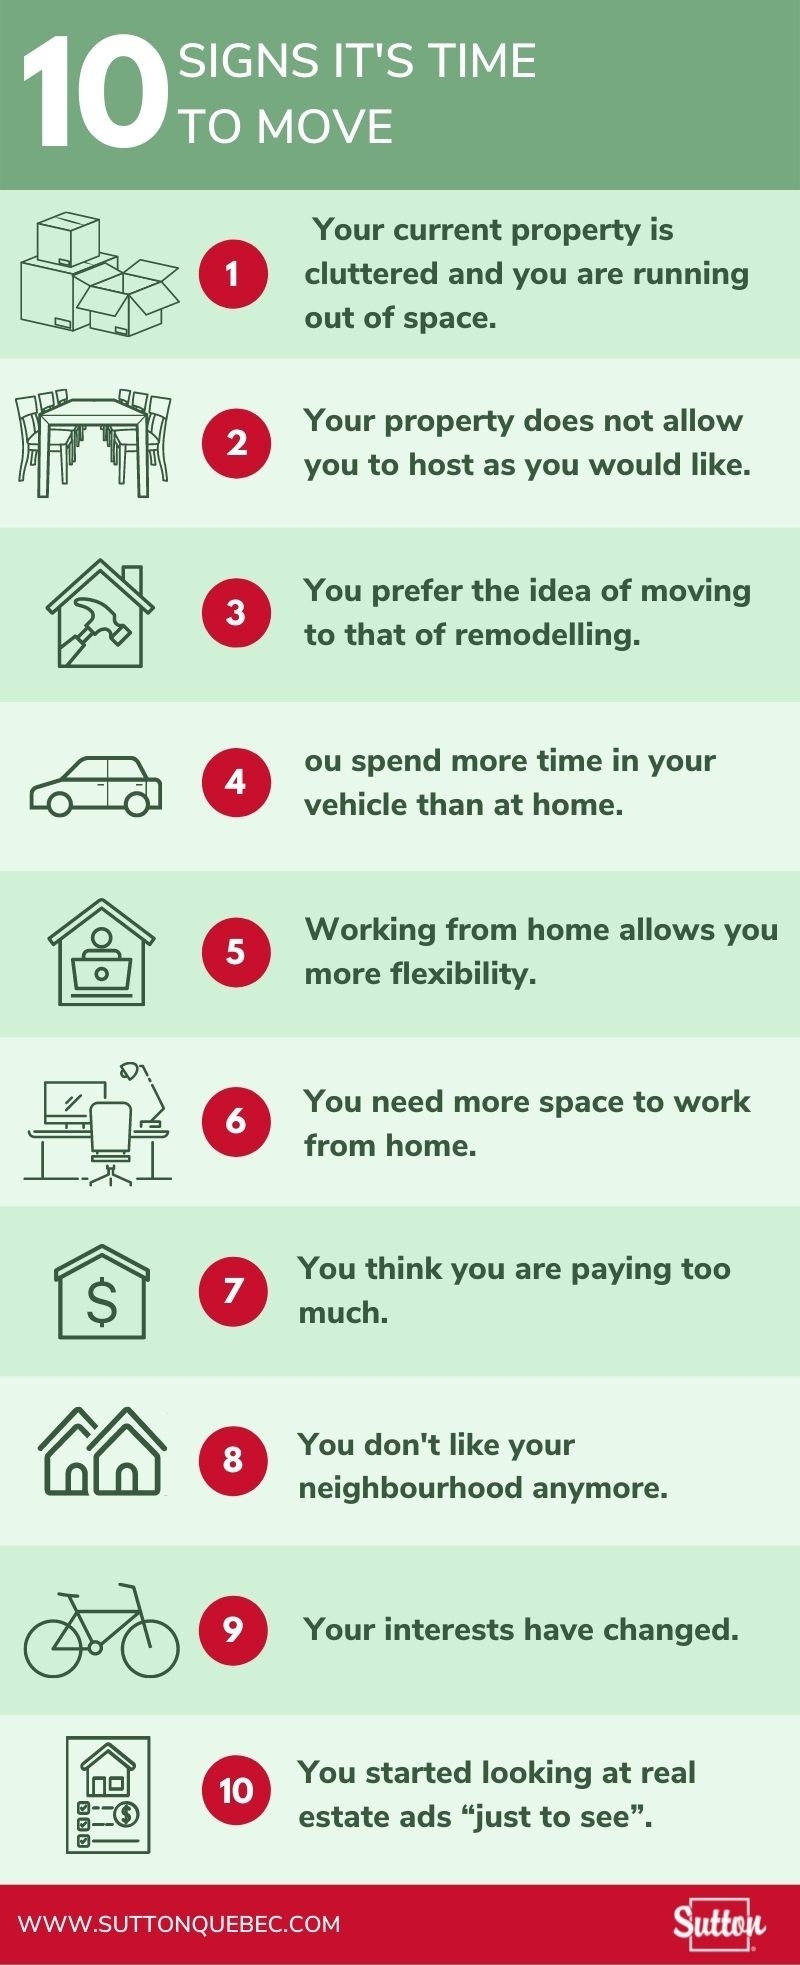 10 signs that show it's time to move